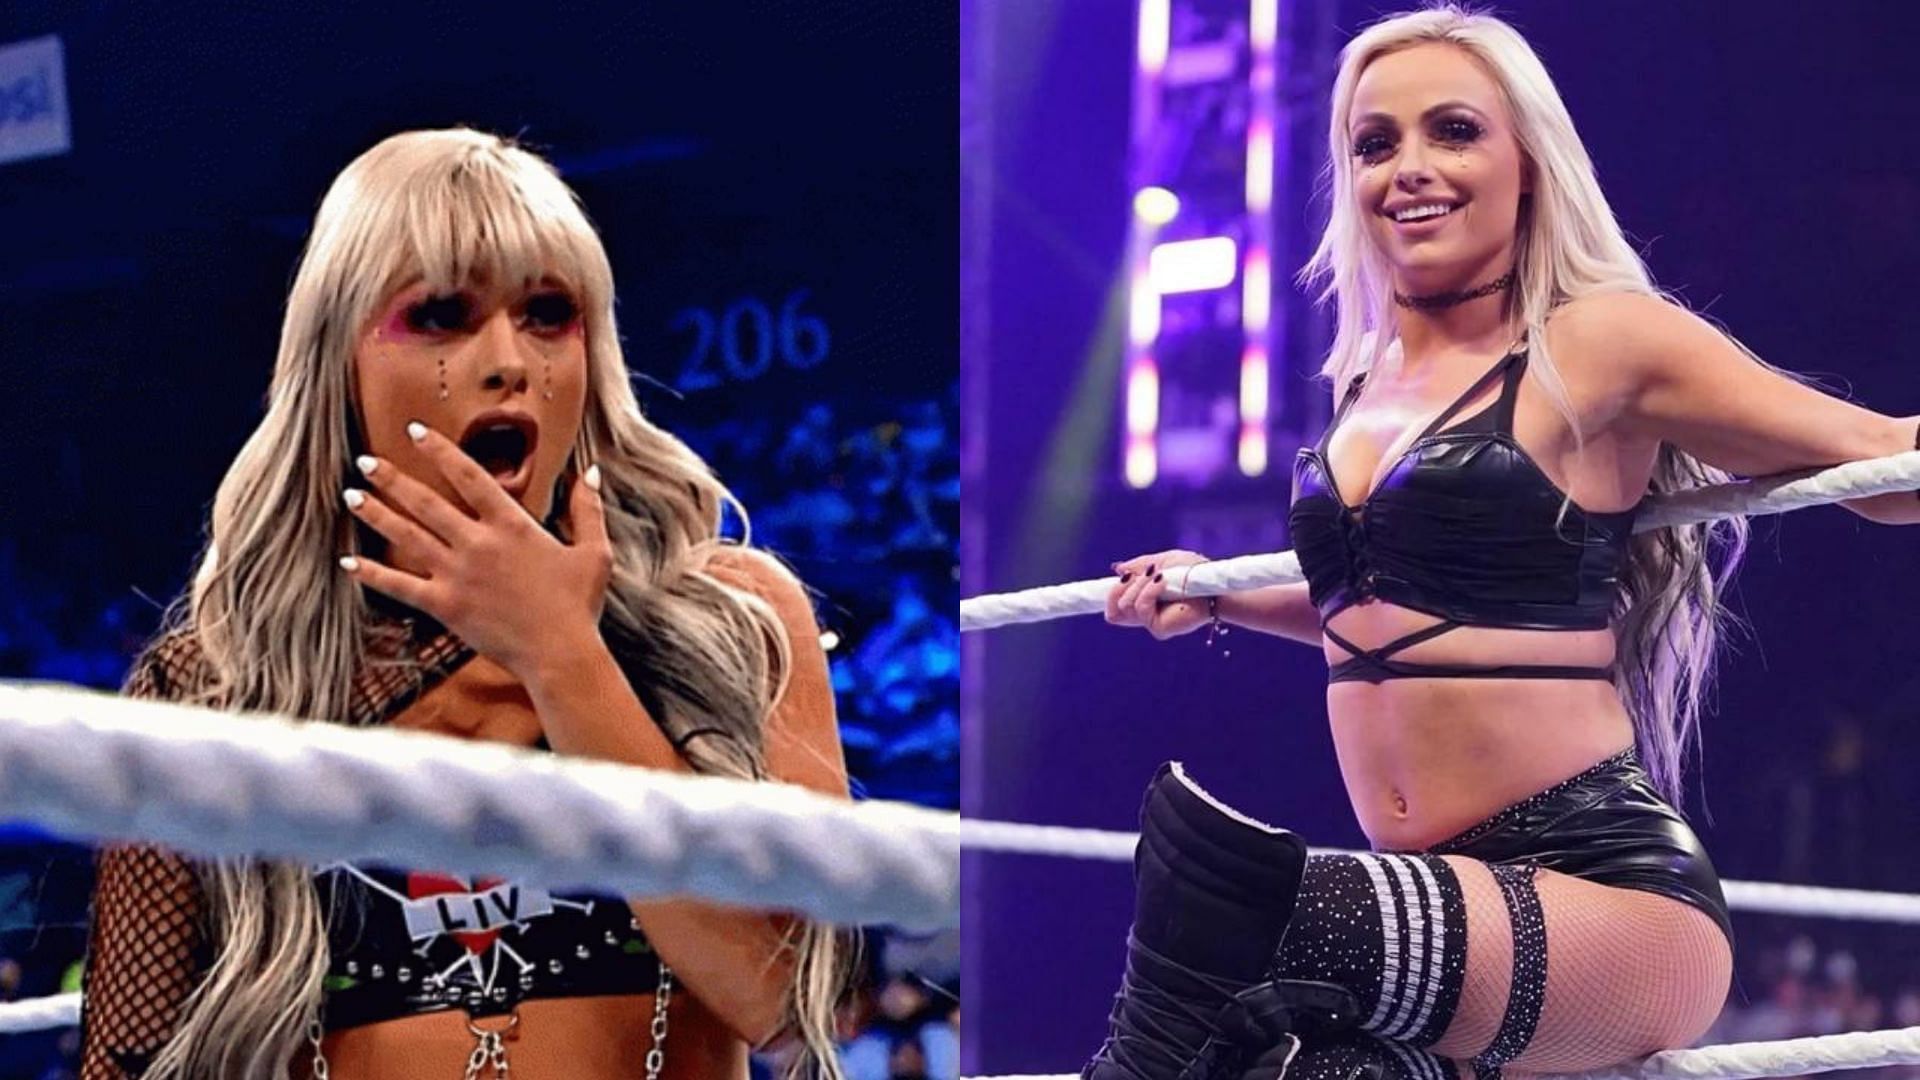 Liv Morgan will compete in the upcoming Women